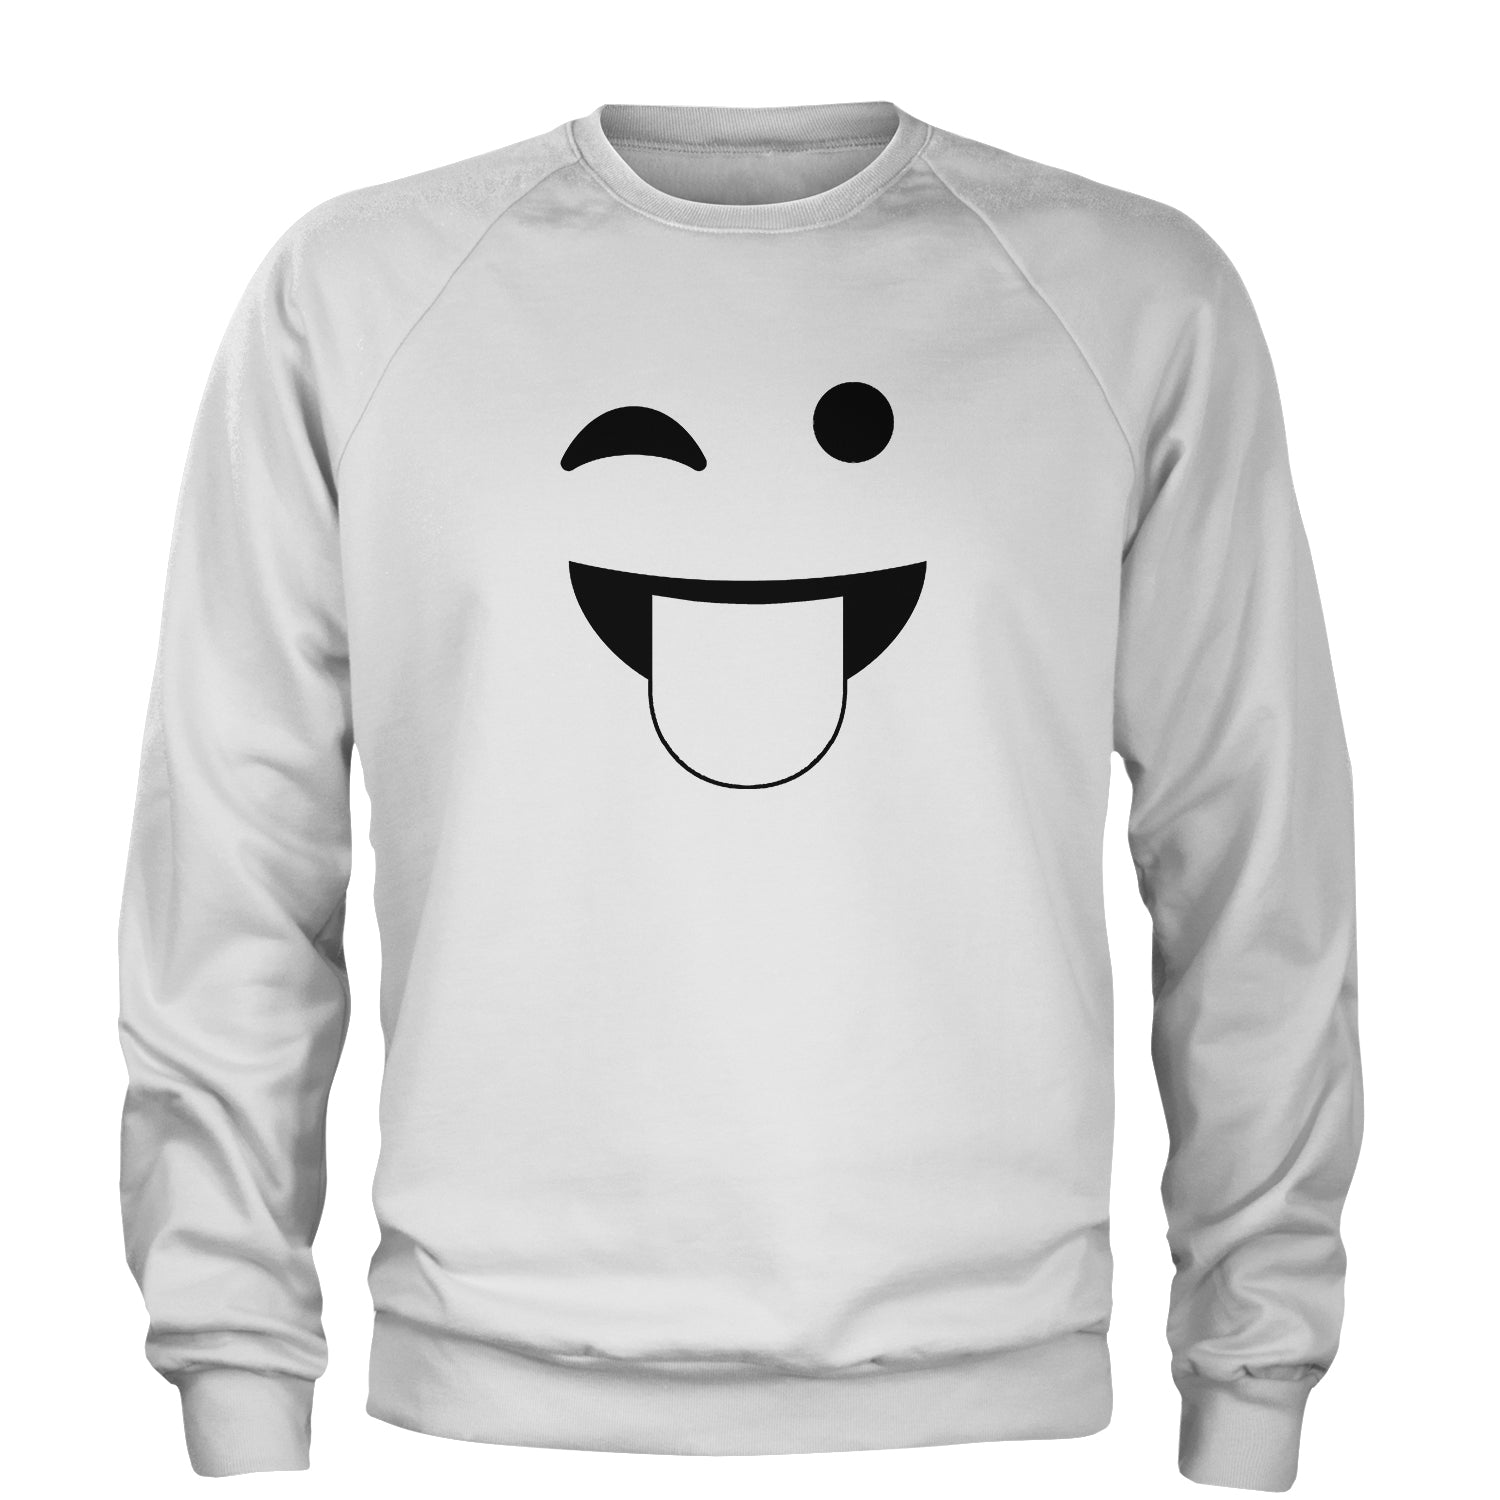 Emoticon Tongue Hanging Out Smile Face Adult Crewneck Sweatshirt cosplay, costume, dress, emoji, emote, face, halloween, smiley, up, yellow by Expression Tees